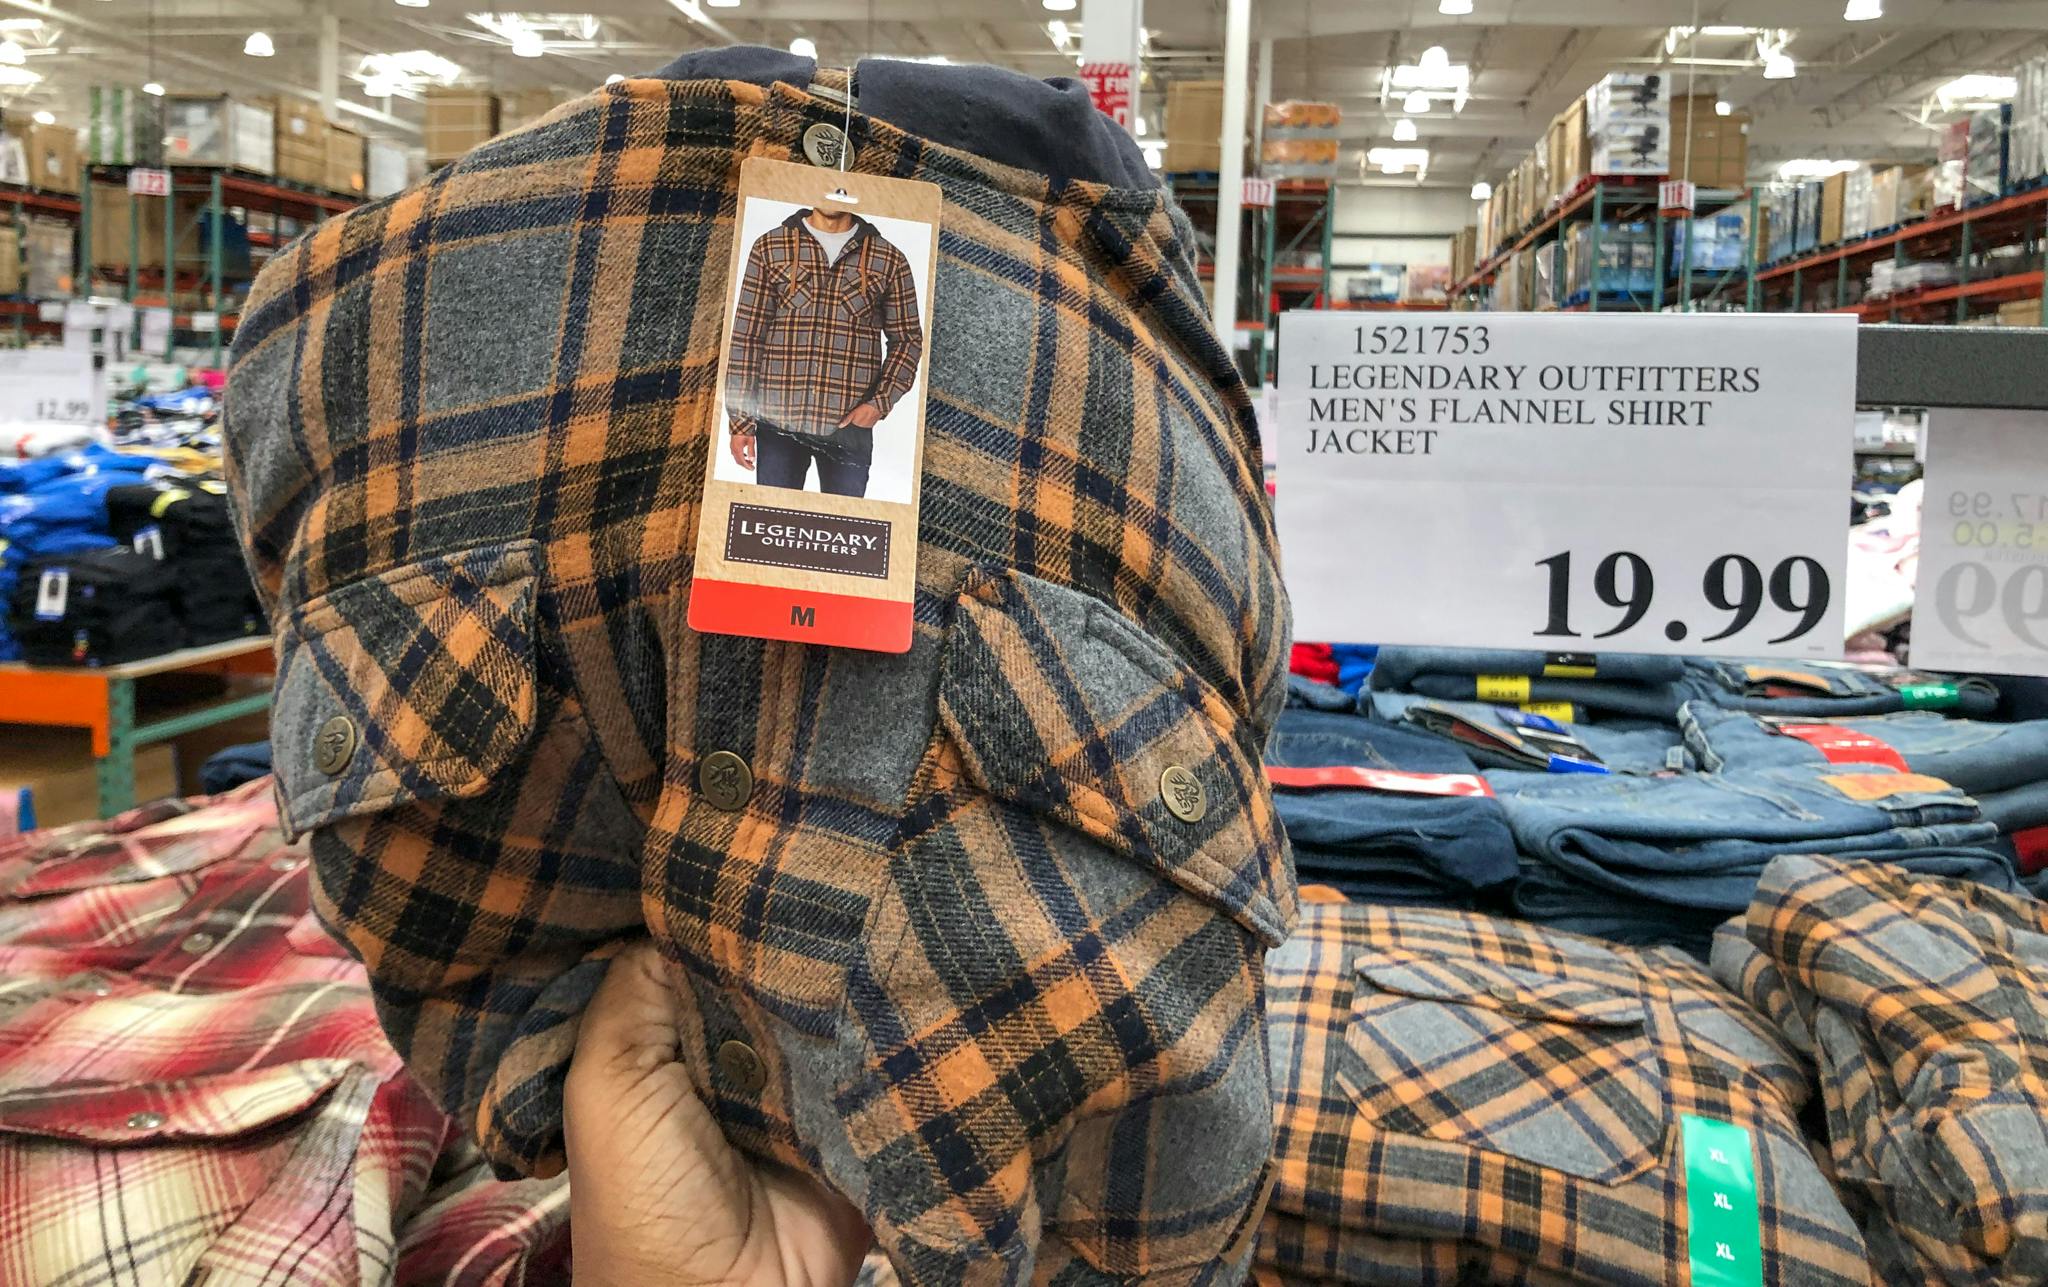 Coatco Lengendary Outfitters Flannel Shirt Jacket Oct 2022 1665070553 1665070553 ?auto=compress